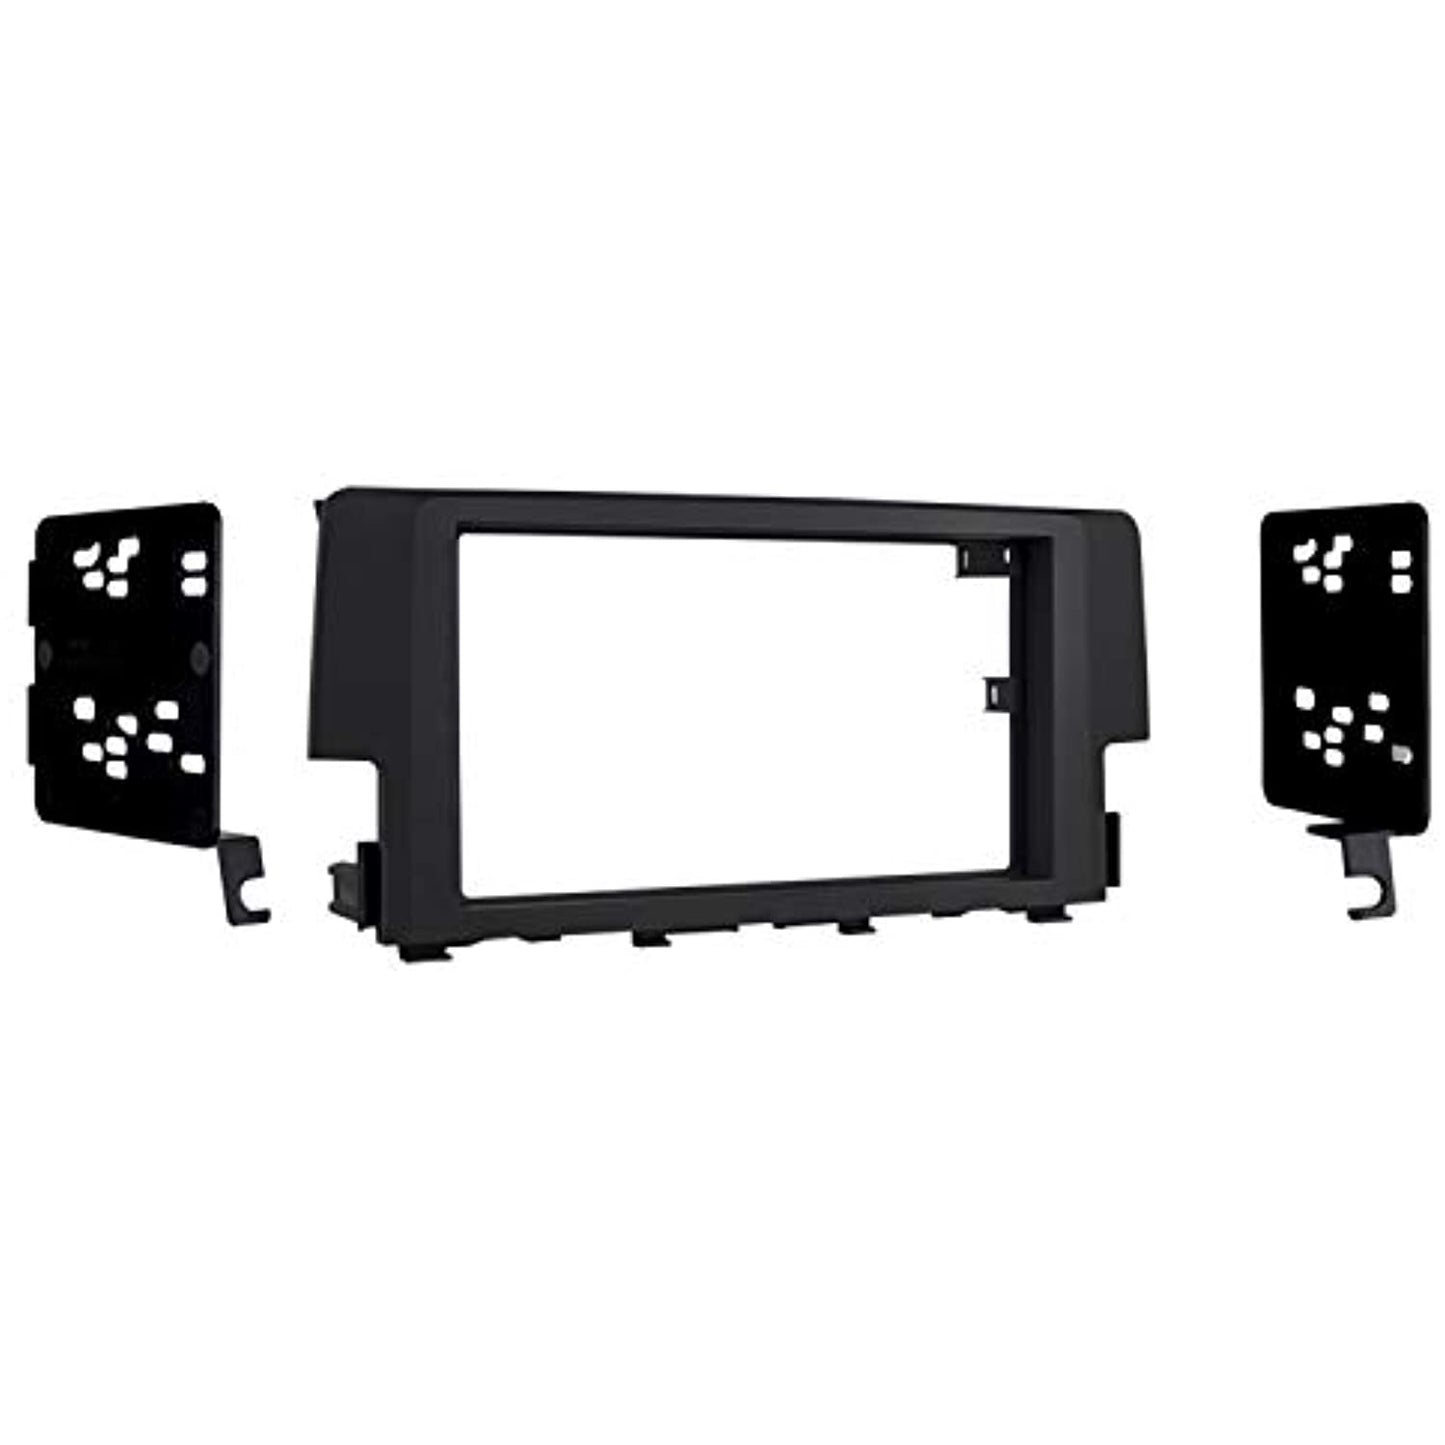 Metra 99-6506 Single DIN Installation Kit for 2004-2008 Chrysler Pacifica Vehicles